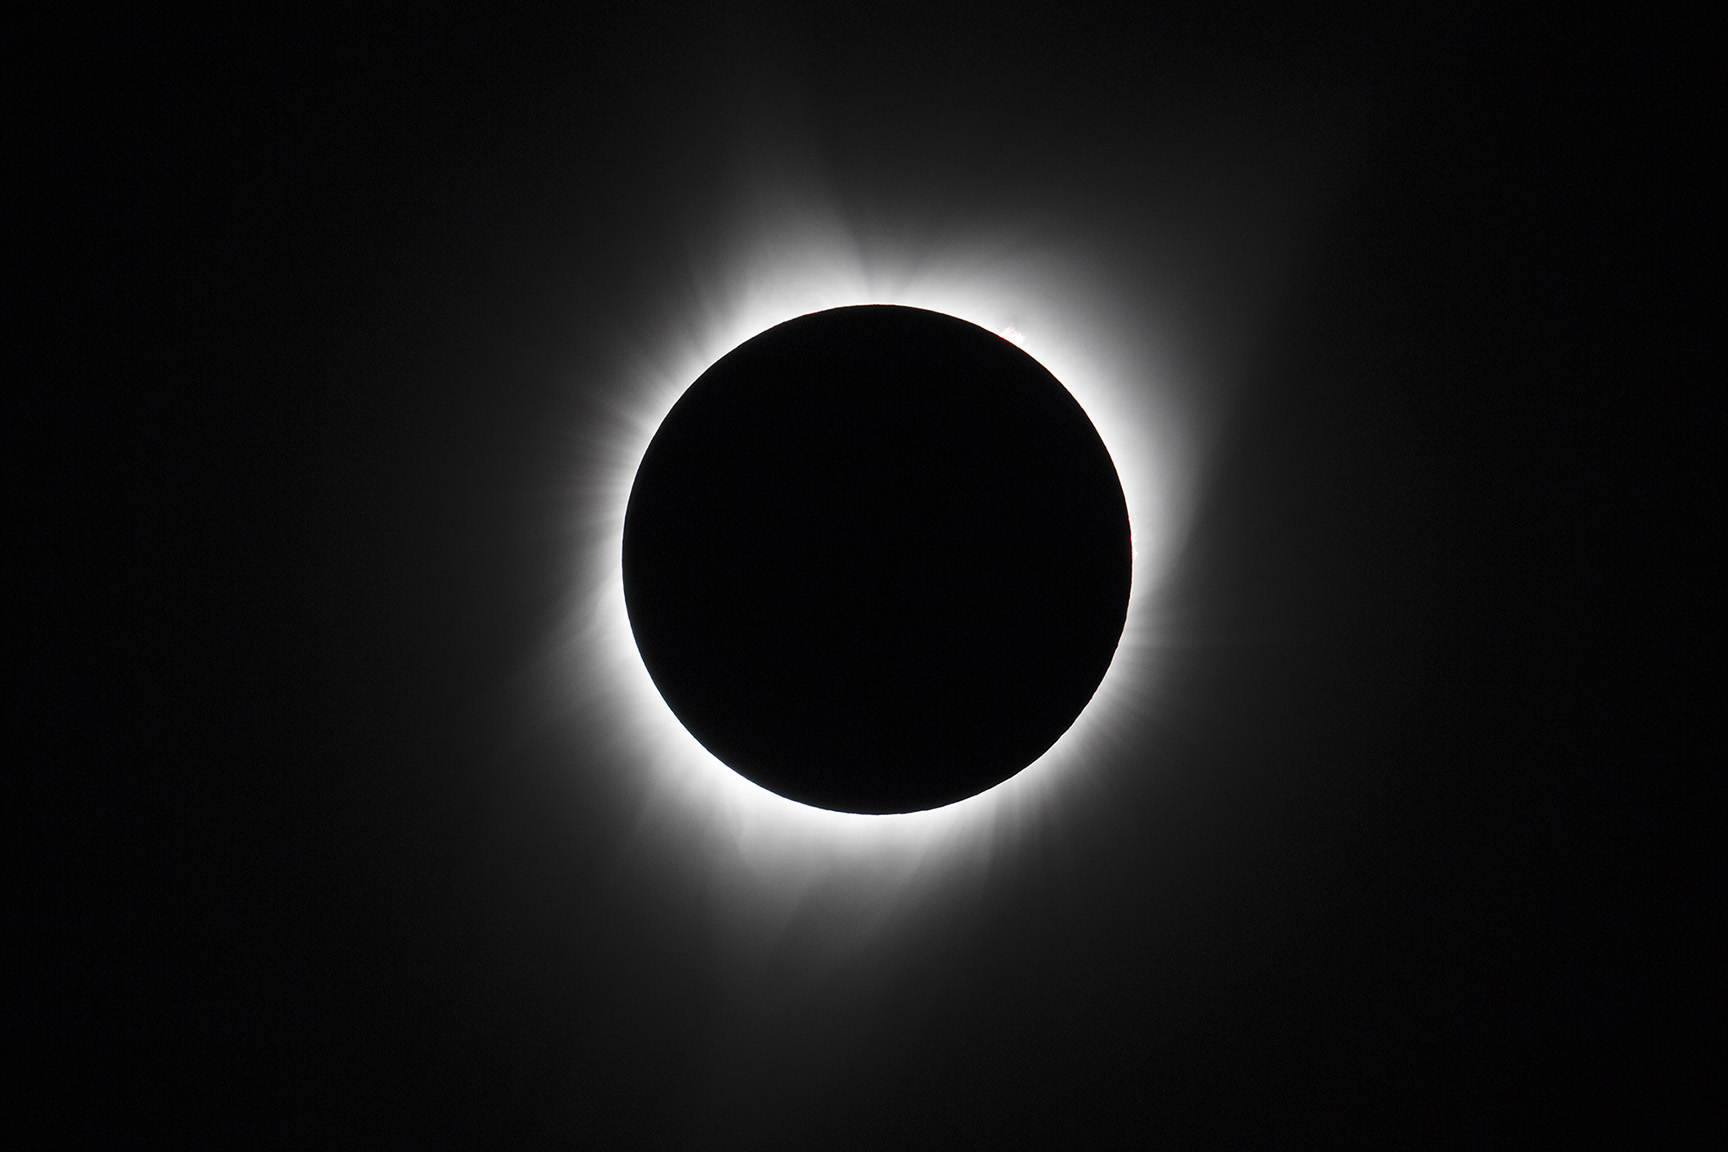 On Monday, August 21, 2017, a total solar eclipse, frequently referred to as the {quote}Great American Eclipse{quote}, was visible within a band across the entire contiguous United States passing from the Pacific to the Atlantic coasts.